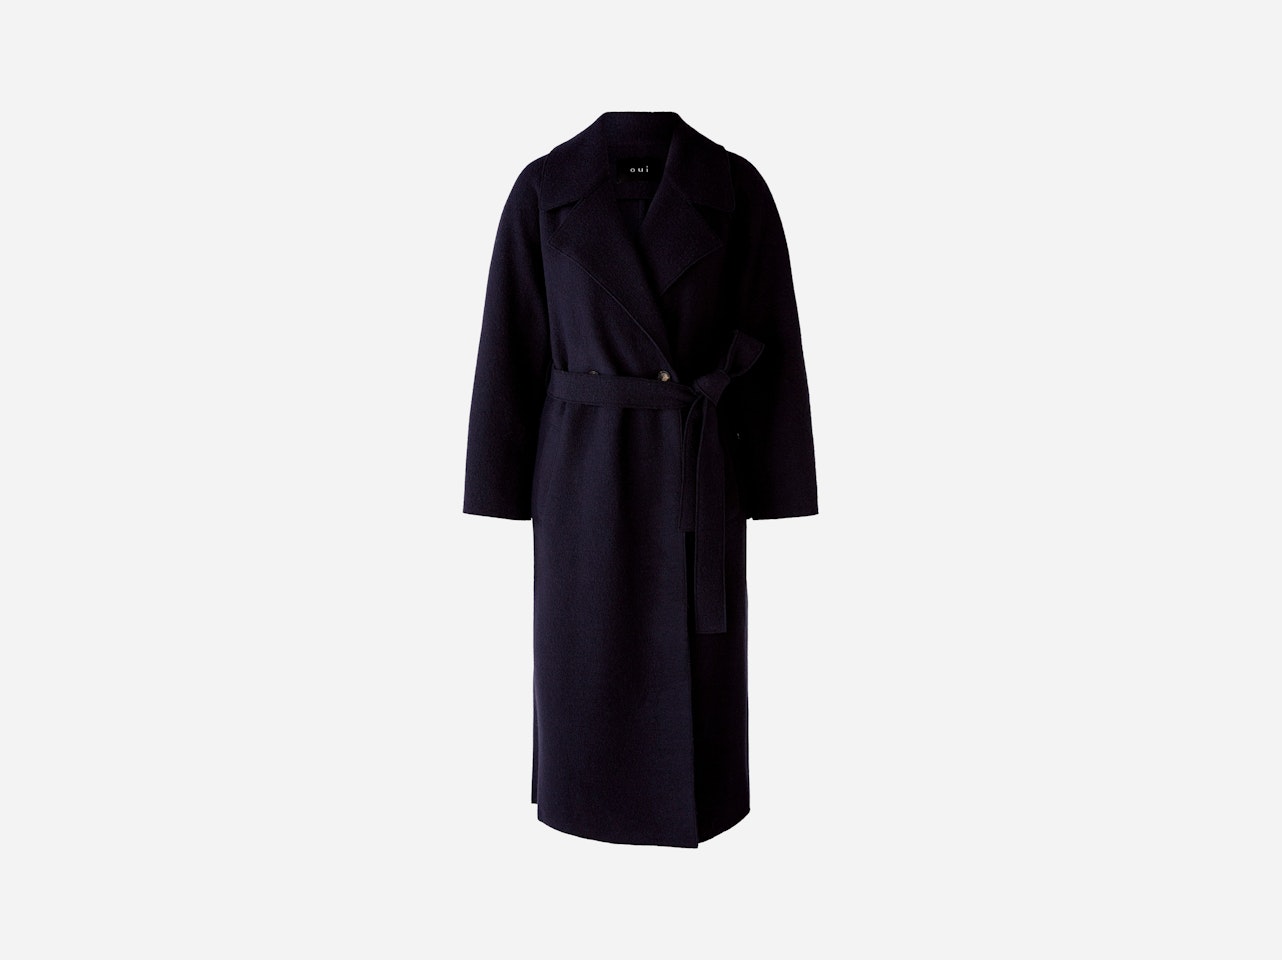 Bild 7 von Double breasted coat made from high-quality, Italian virgin wool in darkblue | Oui